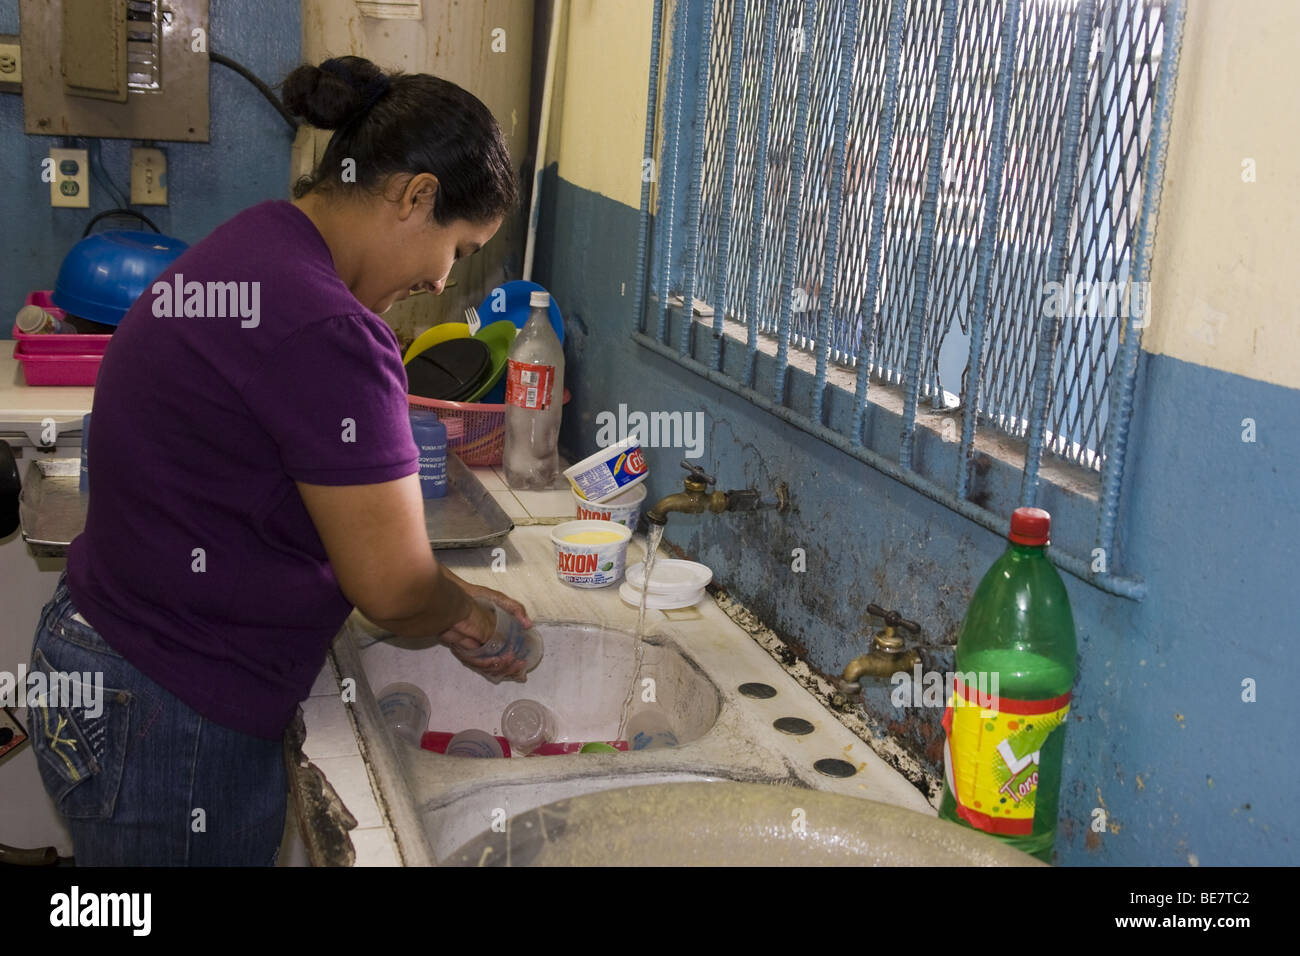 Woman washing the dishes at a low income school area in San Miguelito, Panama City, Republic of Panama, Central America Stock Photo